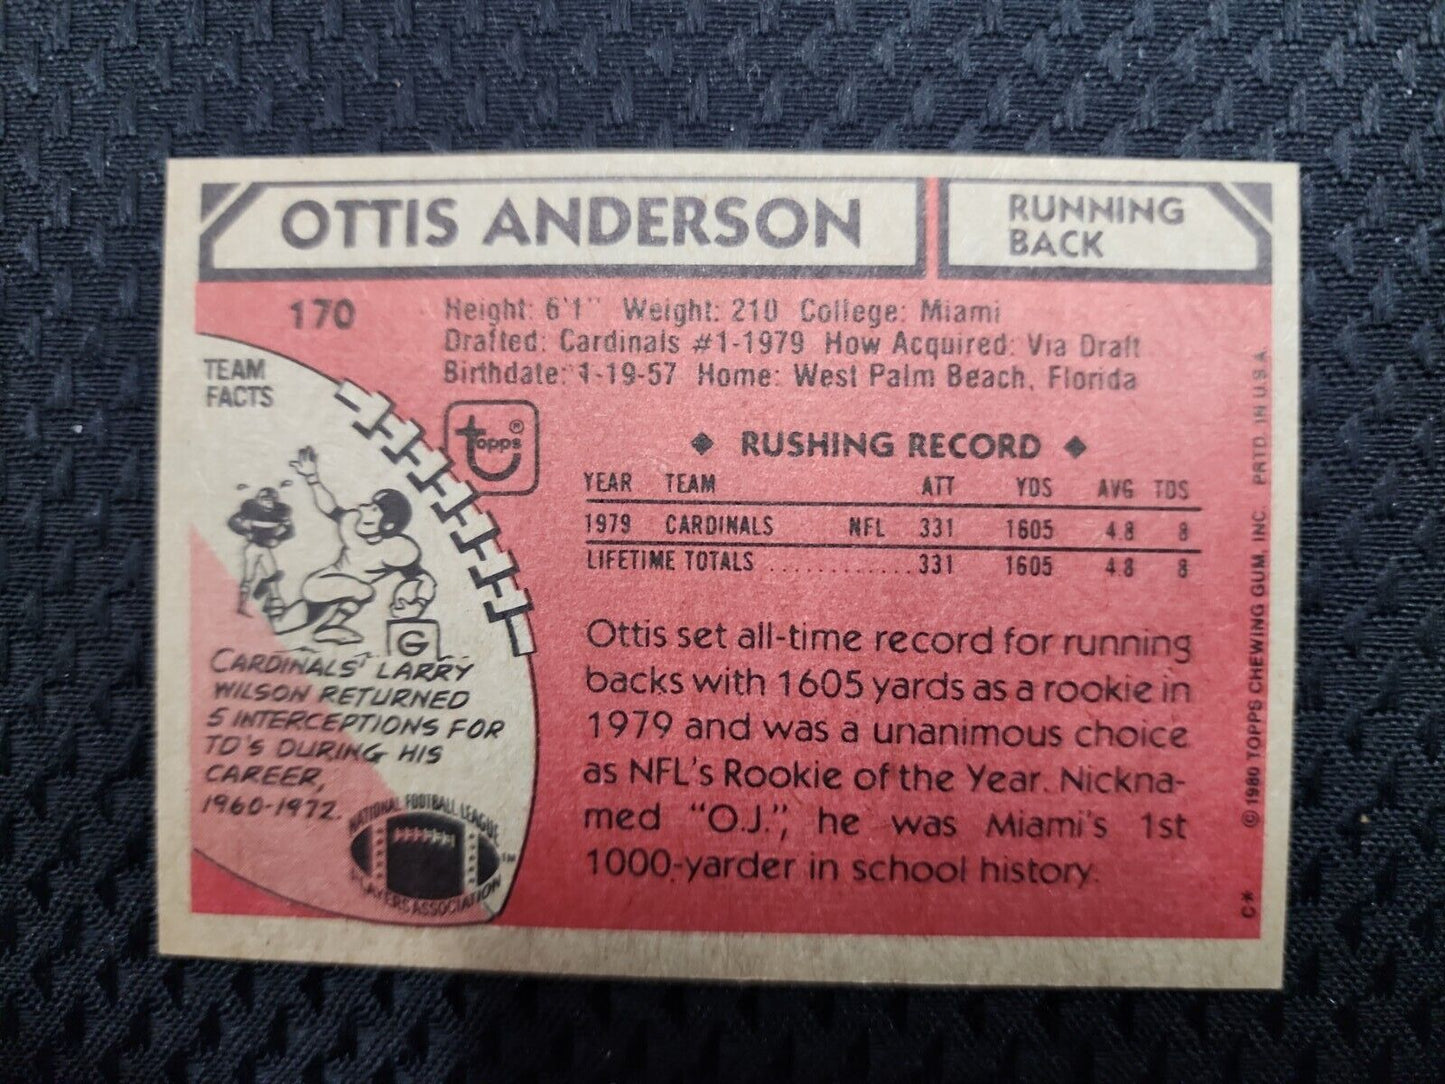 1980 Topps #170 Ottis Anderson Cardinals NFC All-Pro  Rookie Rc Giants